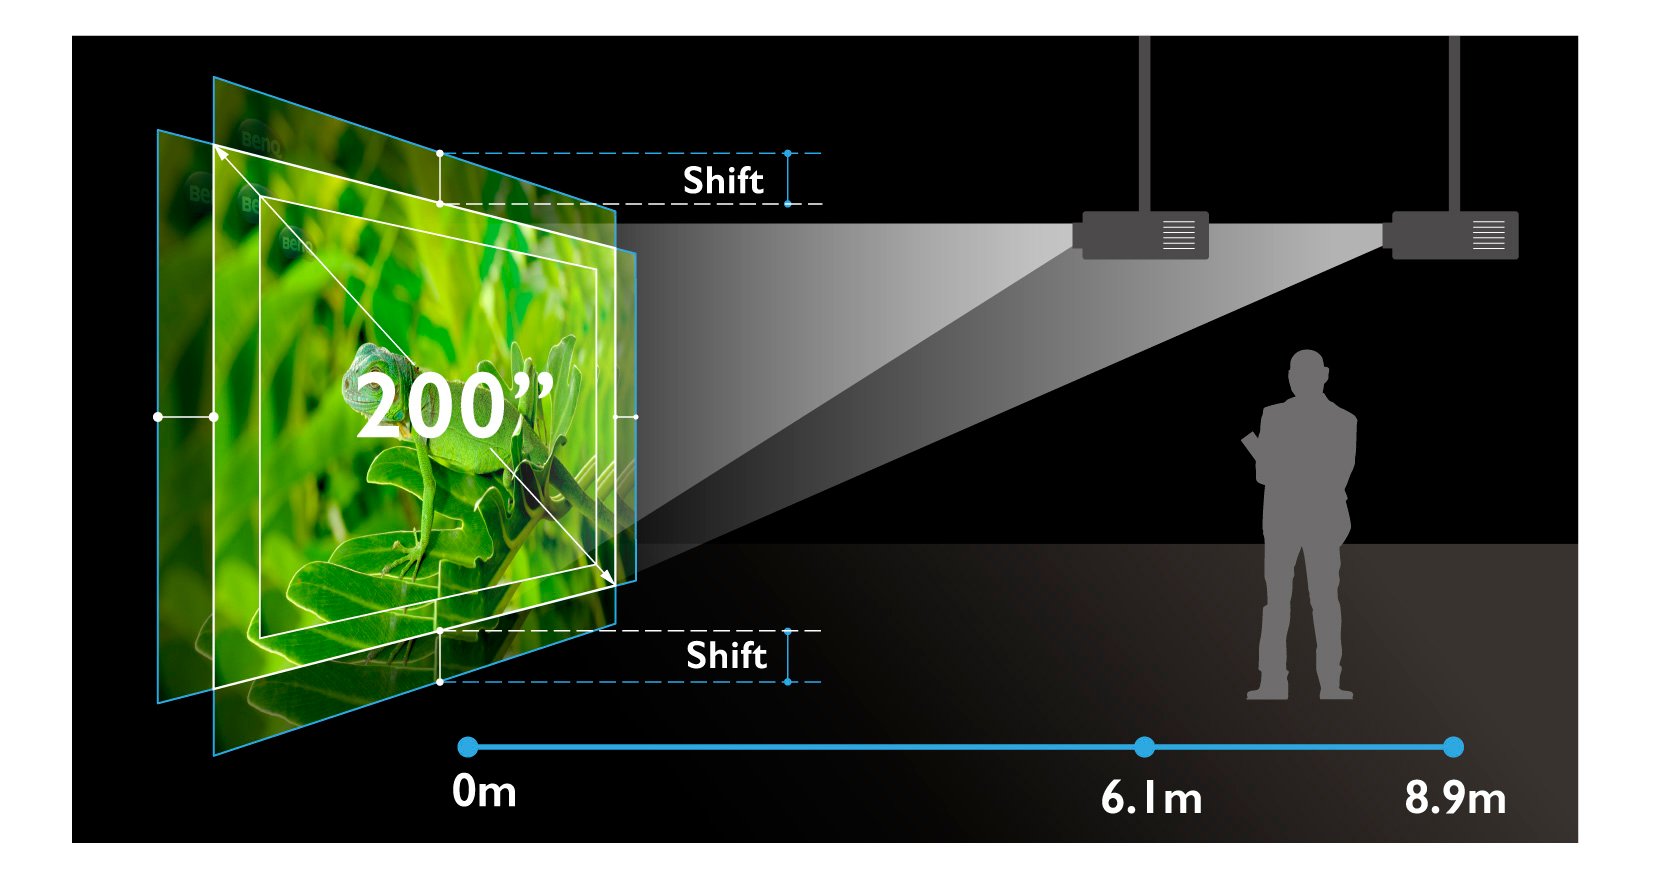 BenQ LK970 4K BlueCore Laser Projector's zoom range, focus, and lens shift systems can perfectly align images.